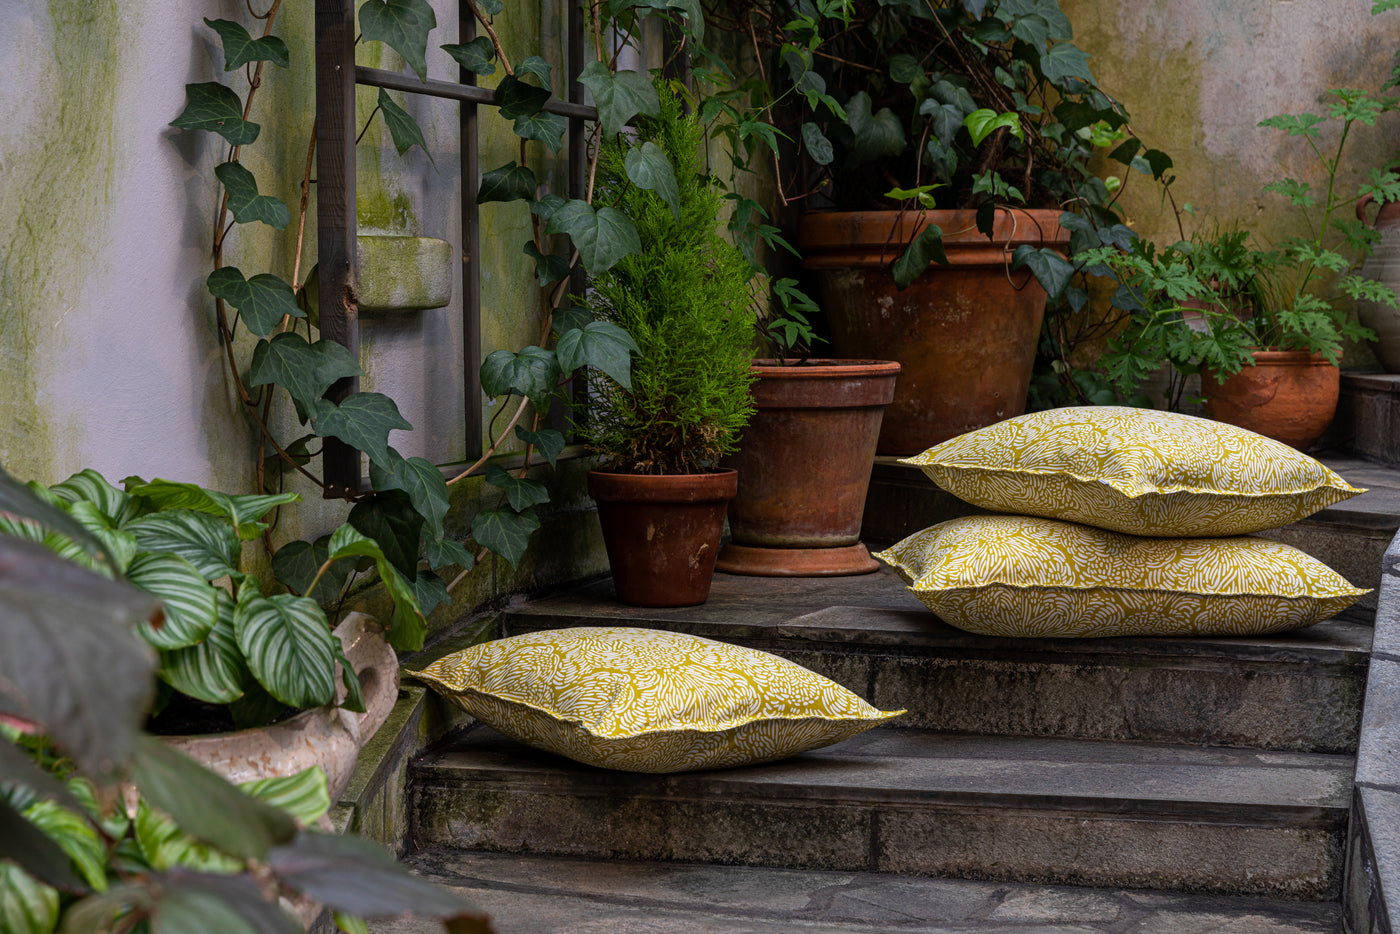 Shop The Look: Softness to your garden